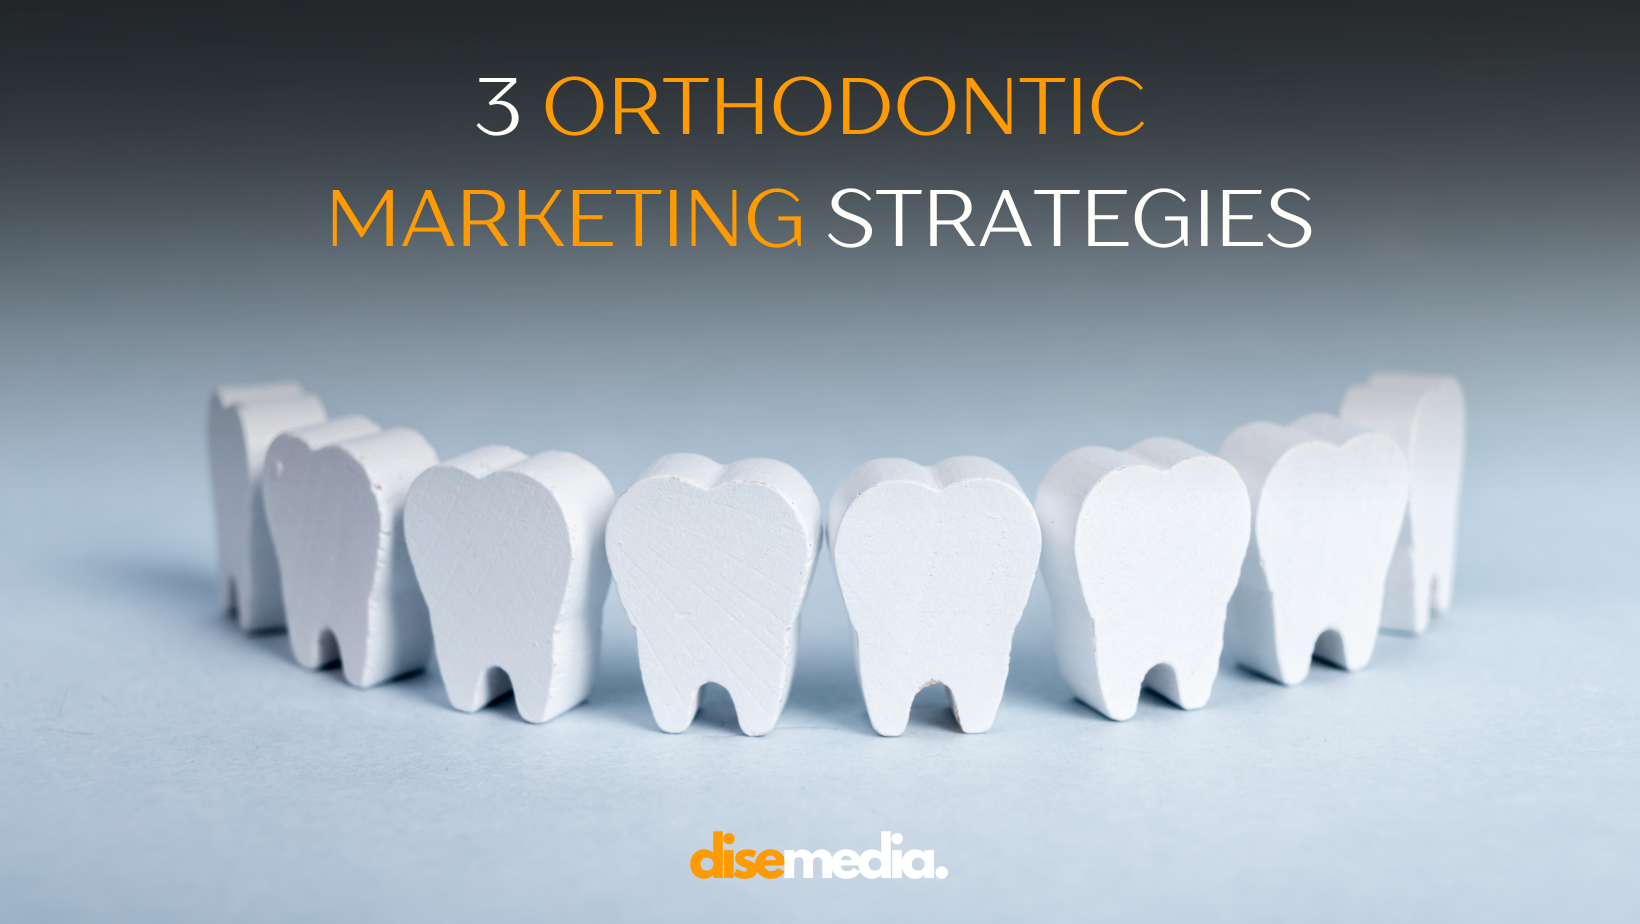 The Ultimate Marketing Power of a Smile: 3 Orthodontic Marketing Strategies